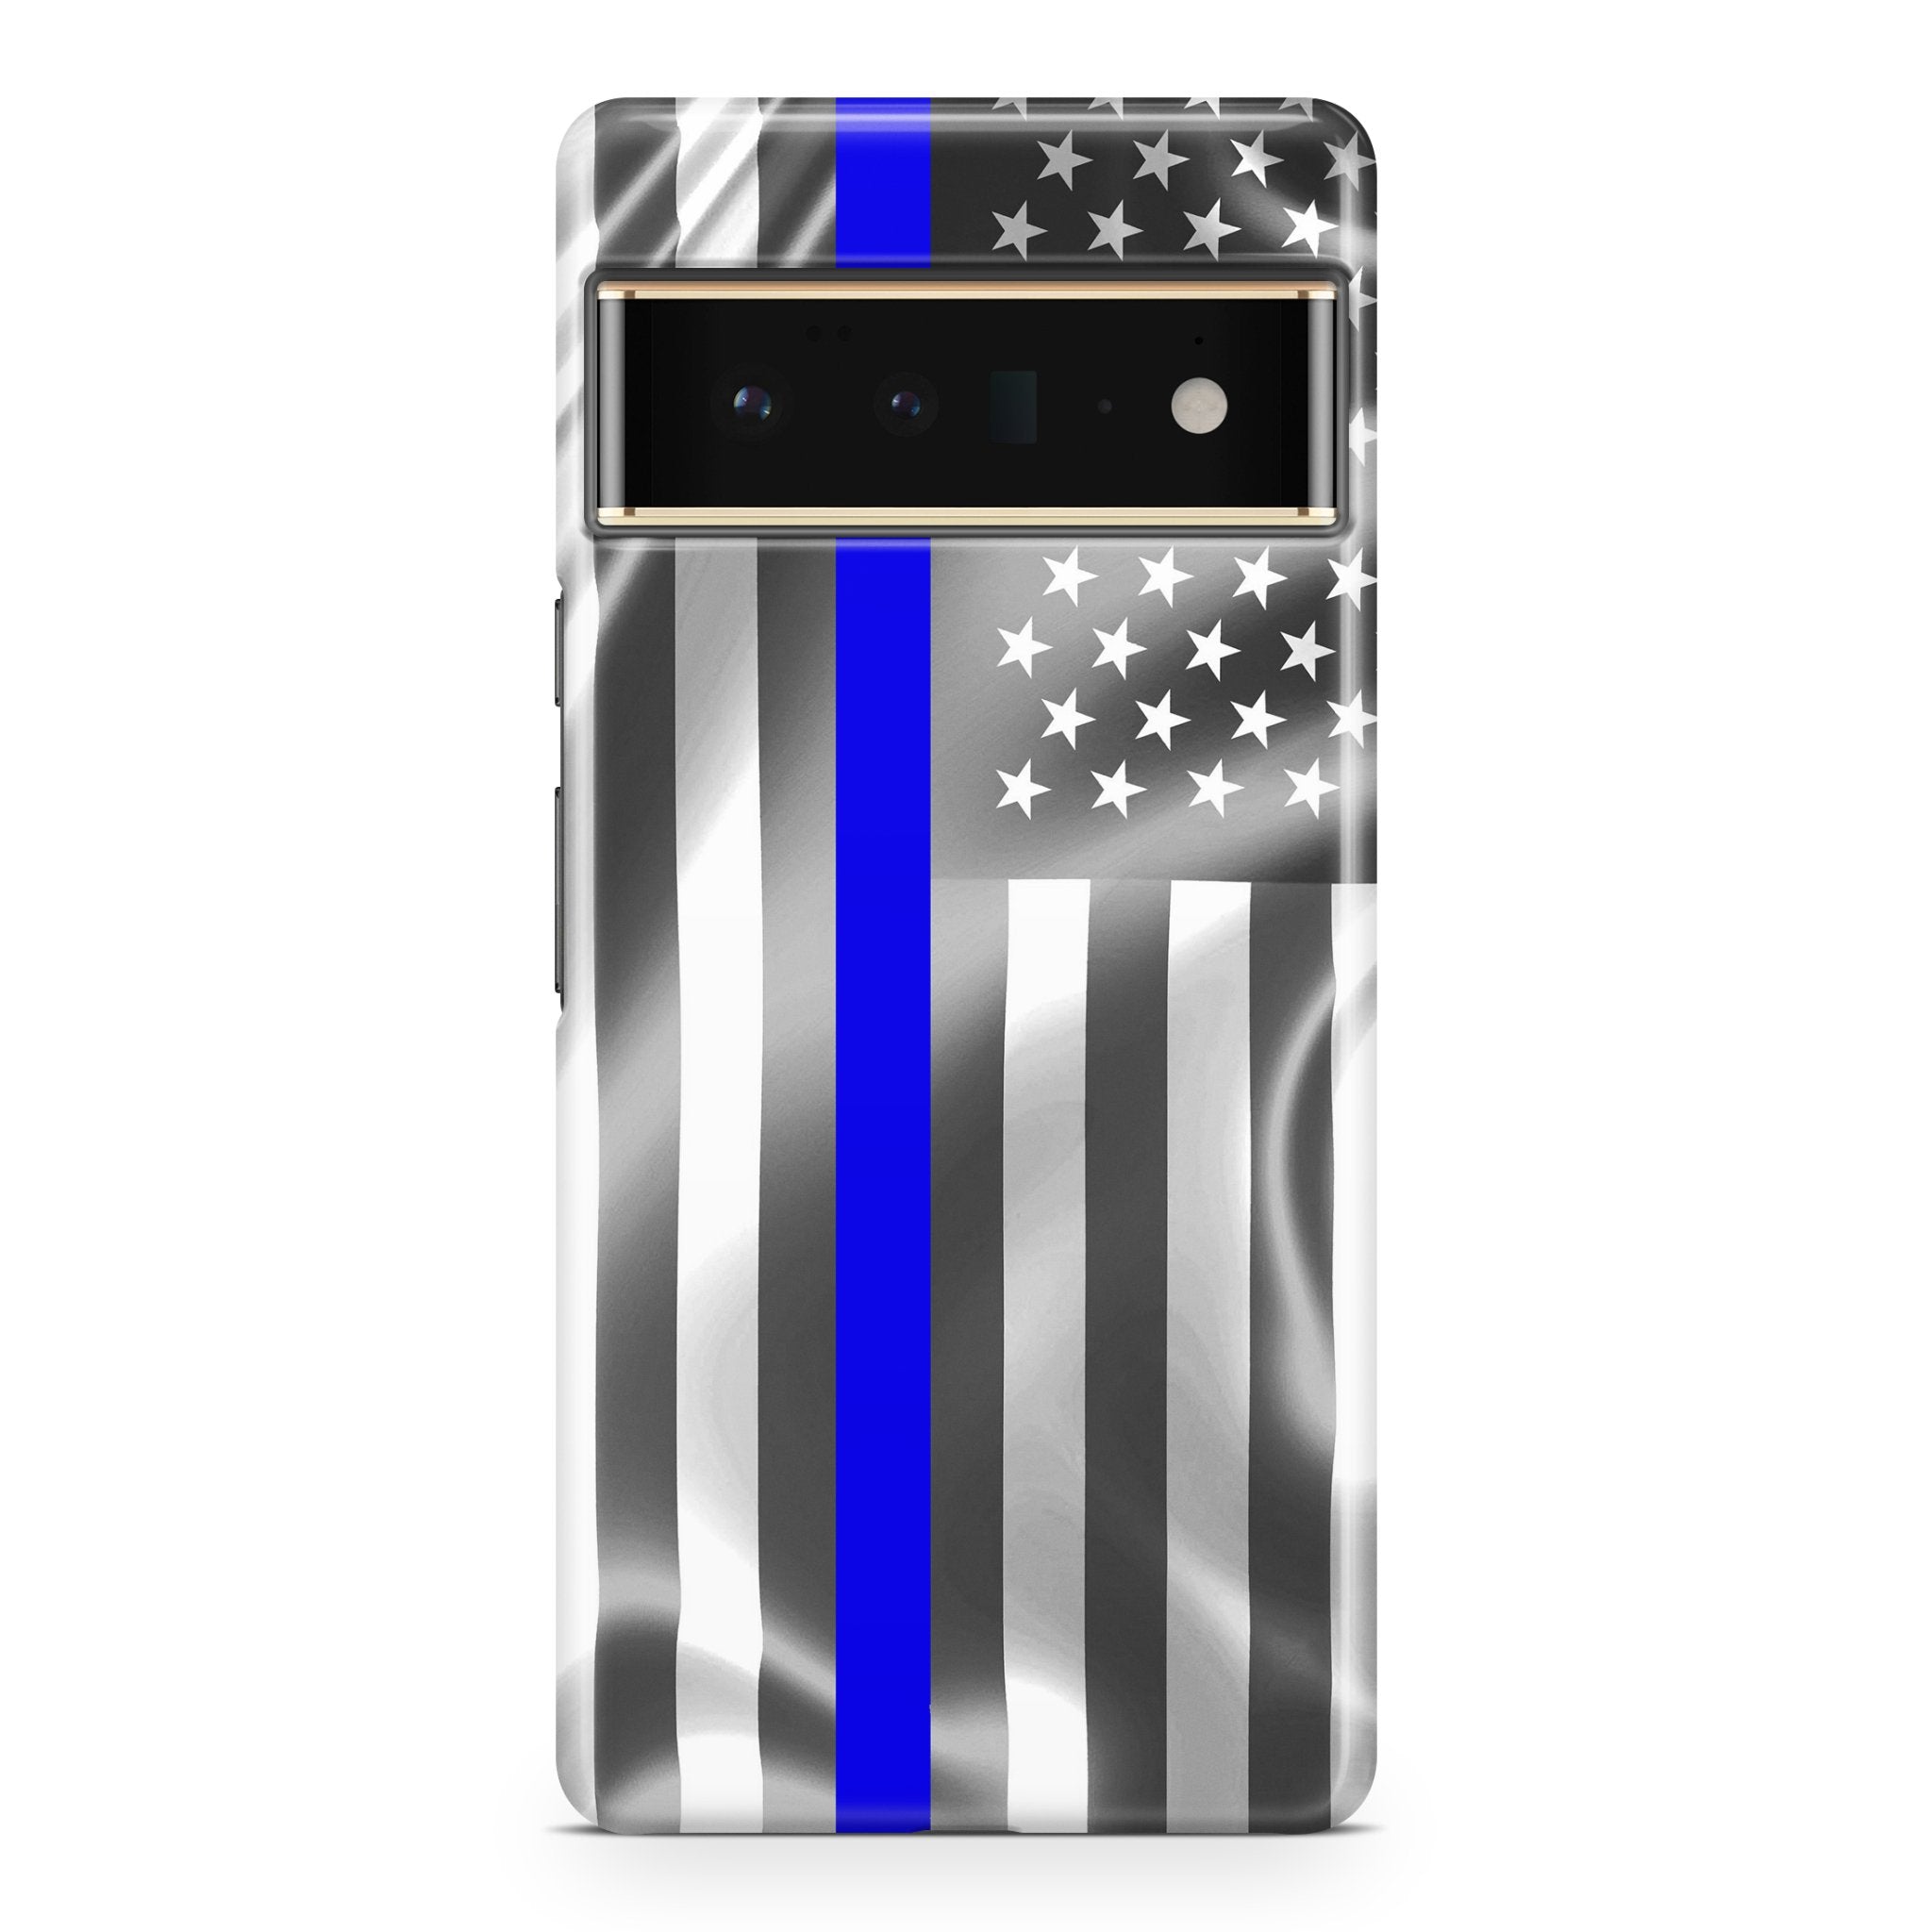 Thin Blue Line - Google phone case designs by CaseSwagger